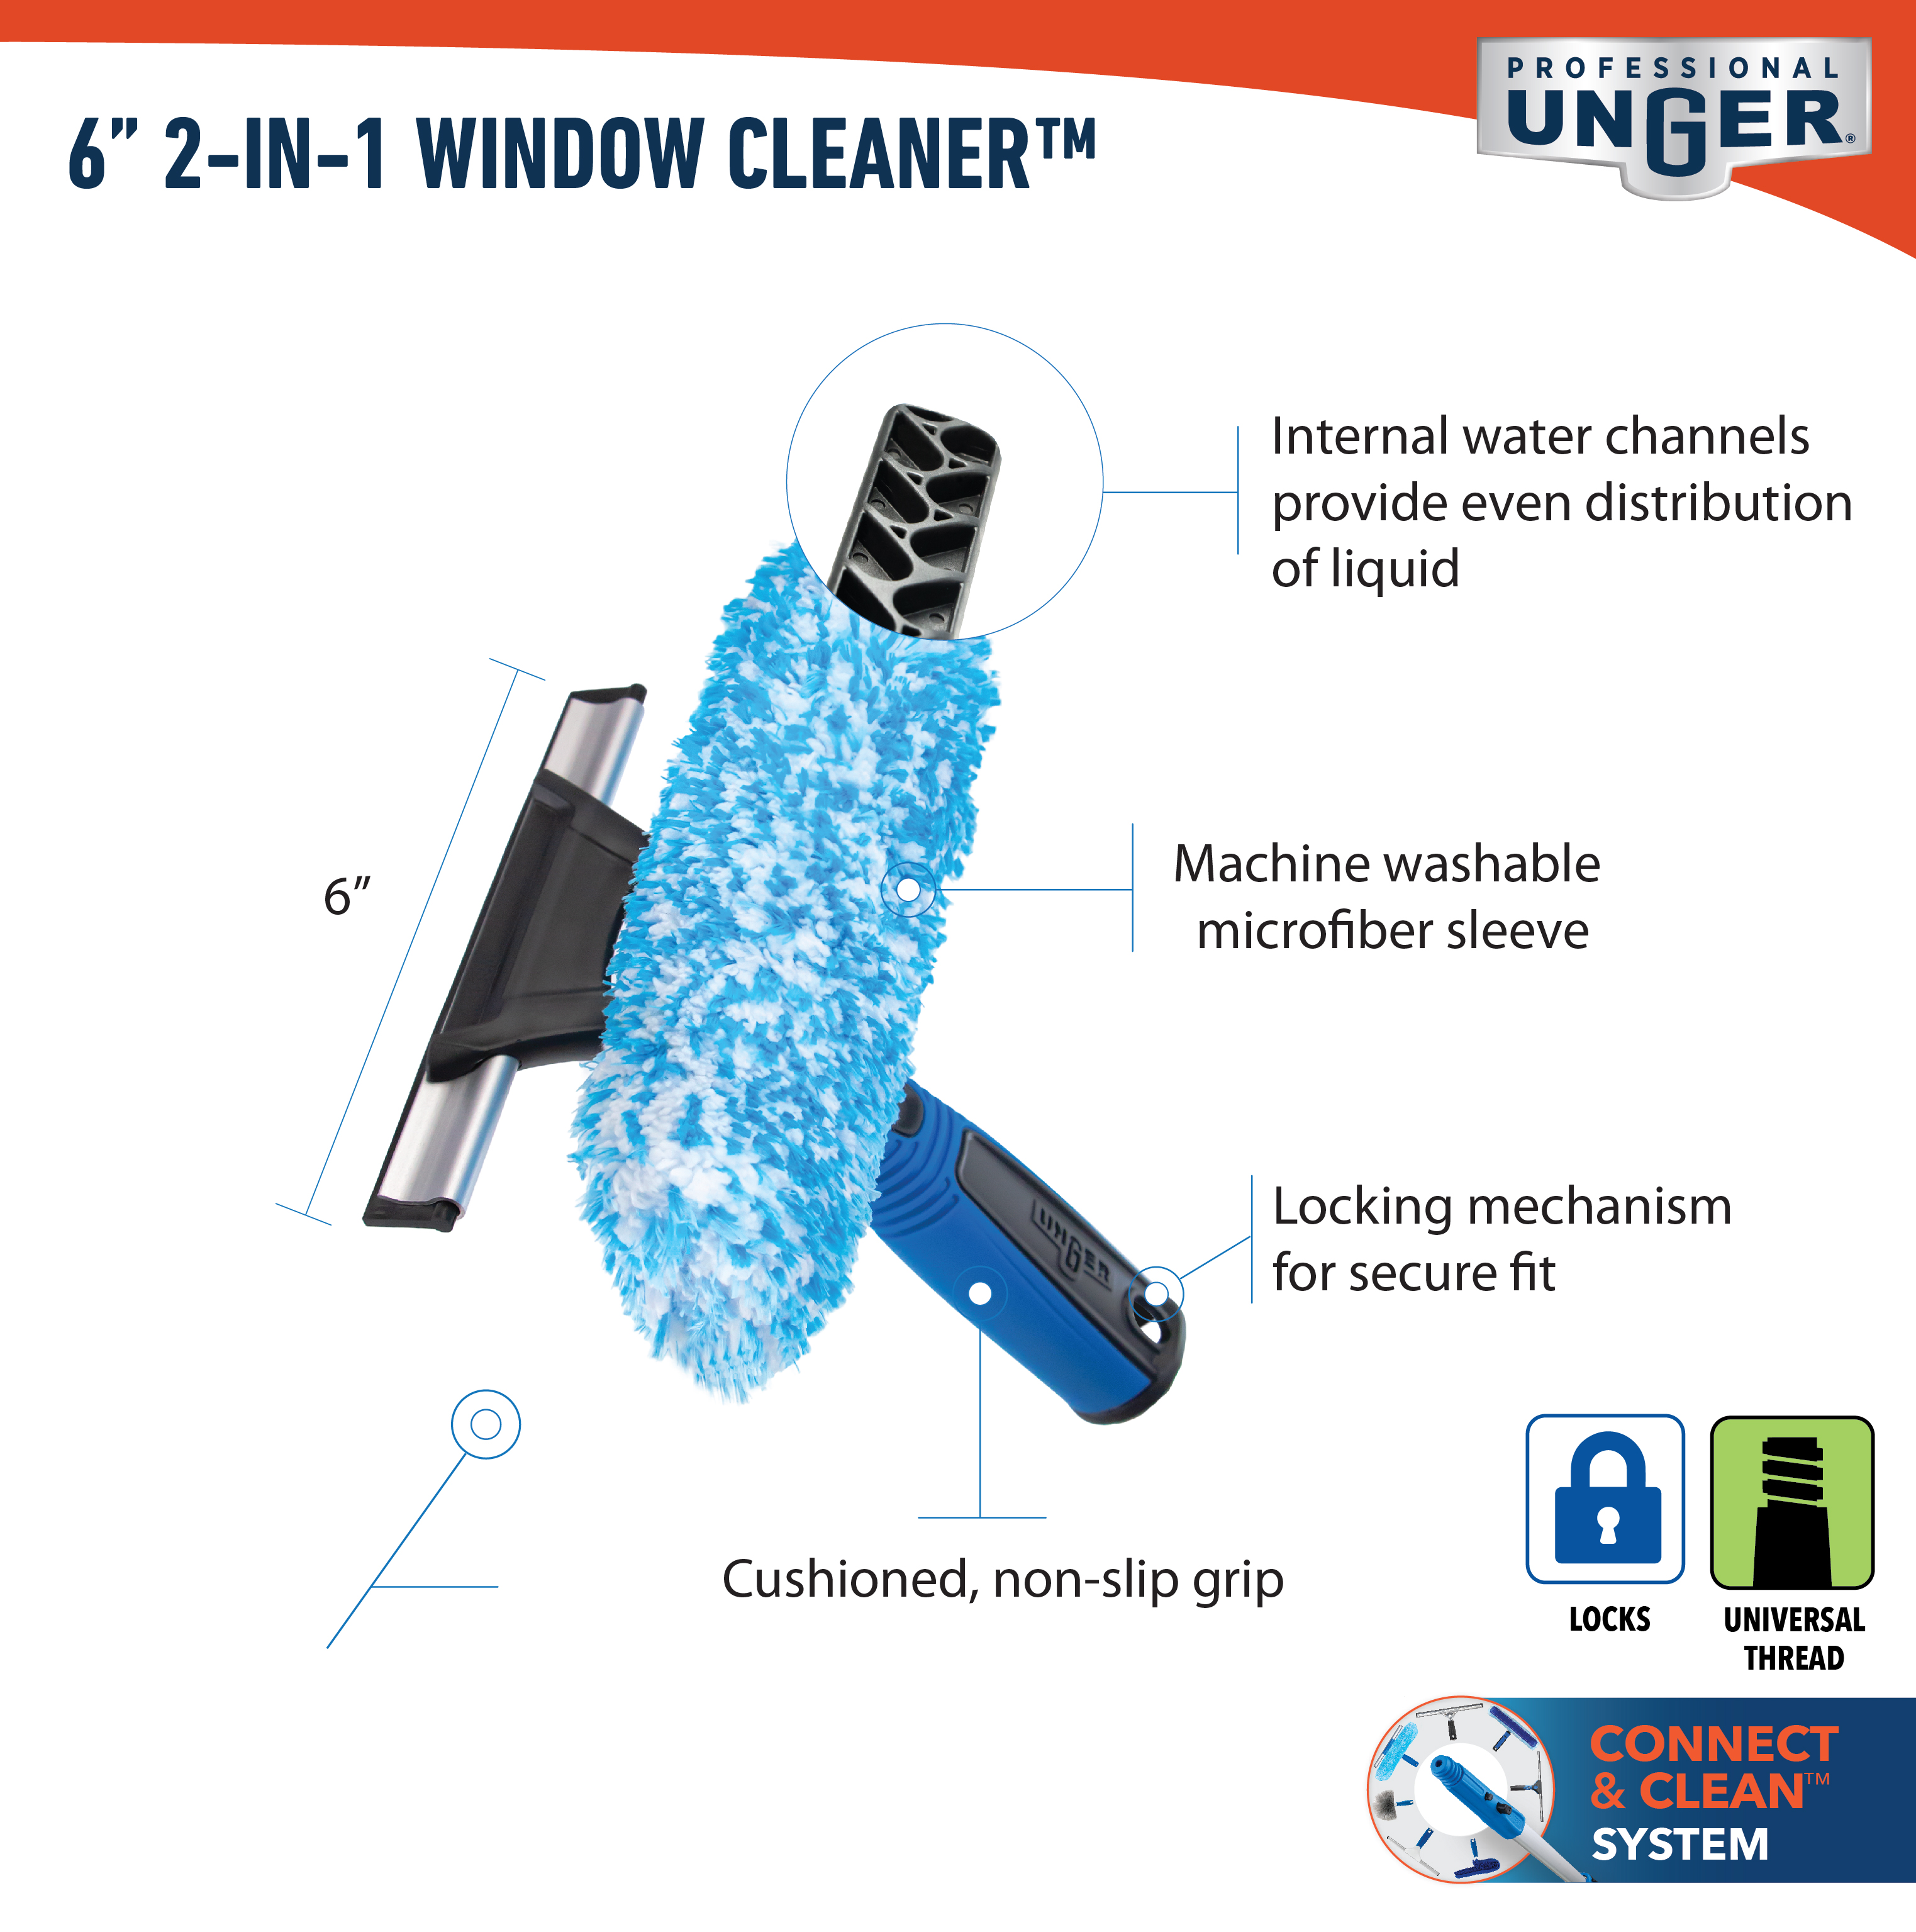 981600_UI_Unger Pro_6 inch 2-in-1 Window Cleaner_Infographics 1